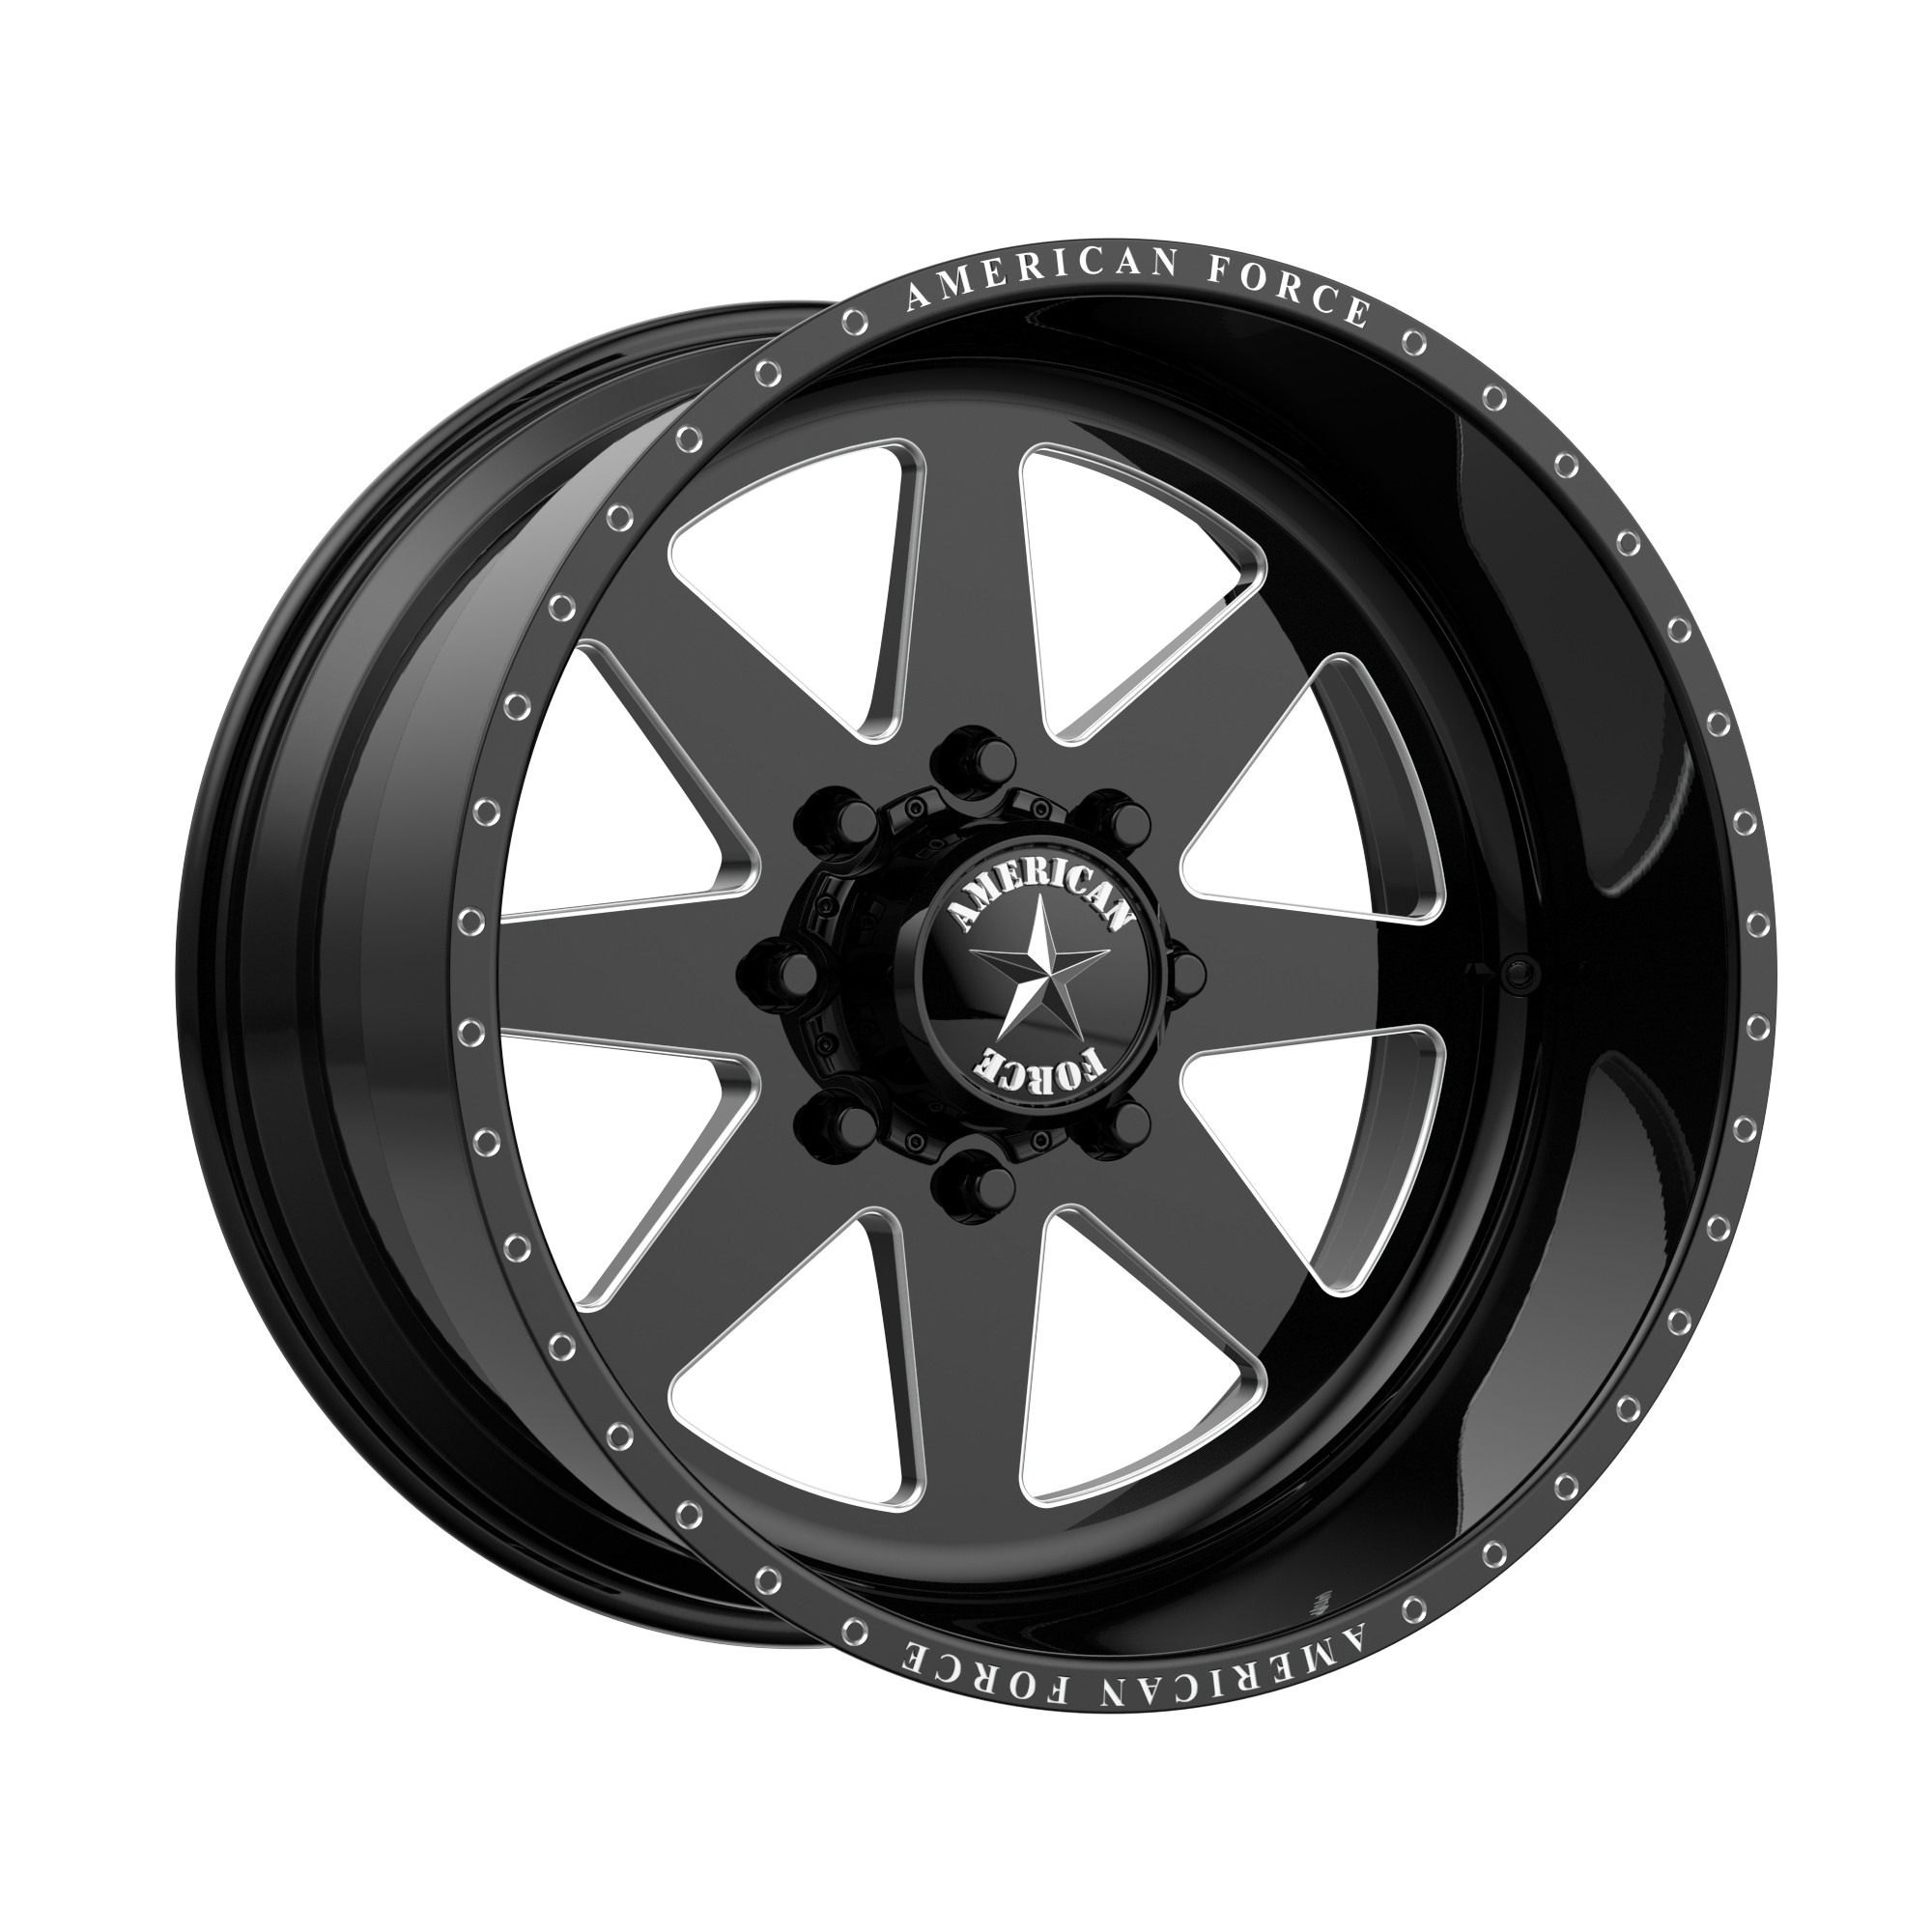 INDEPENDENCE SS 20x12 5x127.00 GLOSS BLACK MACHINED (-40 mm) - Tires and Engine Performance